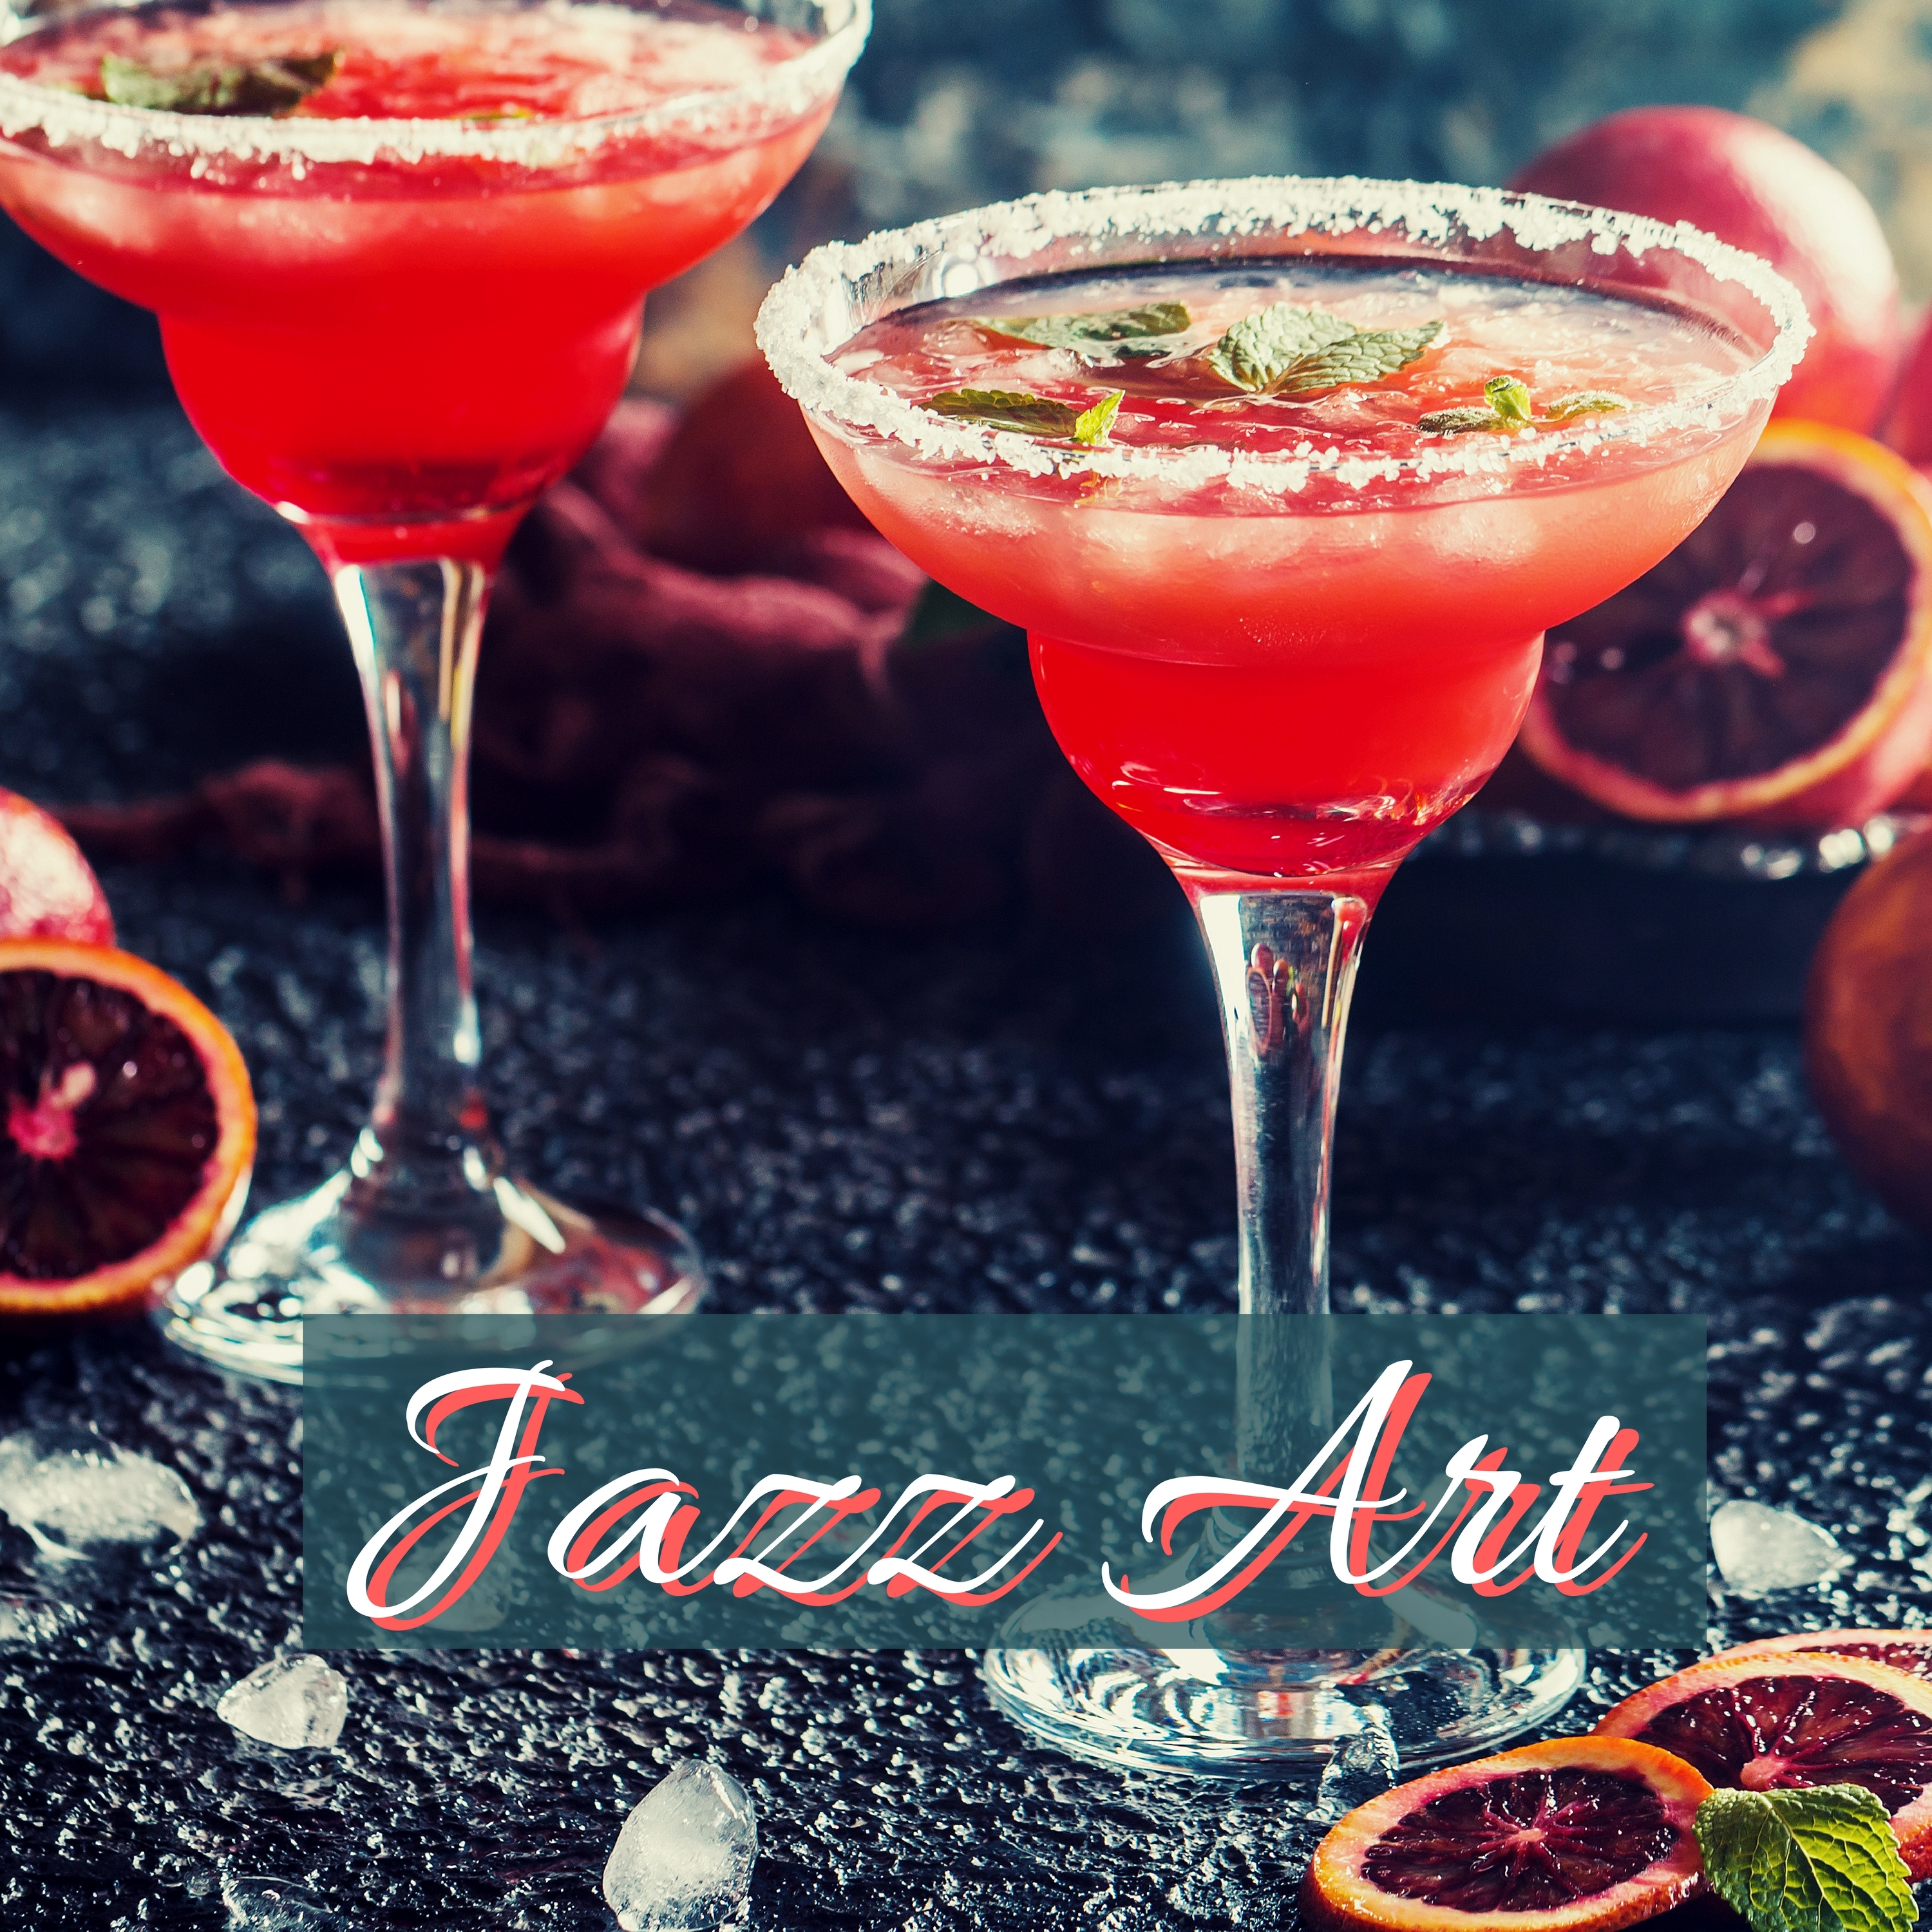 Jazz Art - Bossa Blues for Loung Bar and Instrumental Background for Restaurant